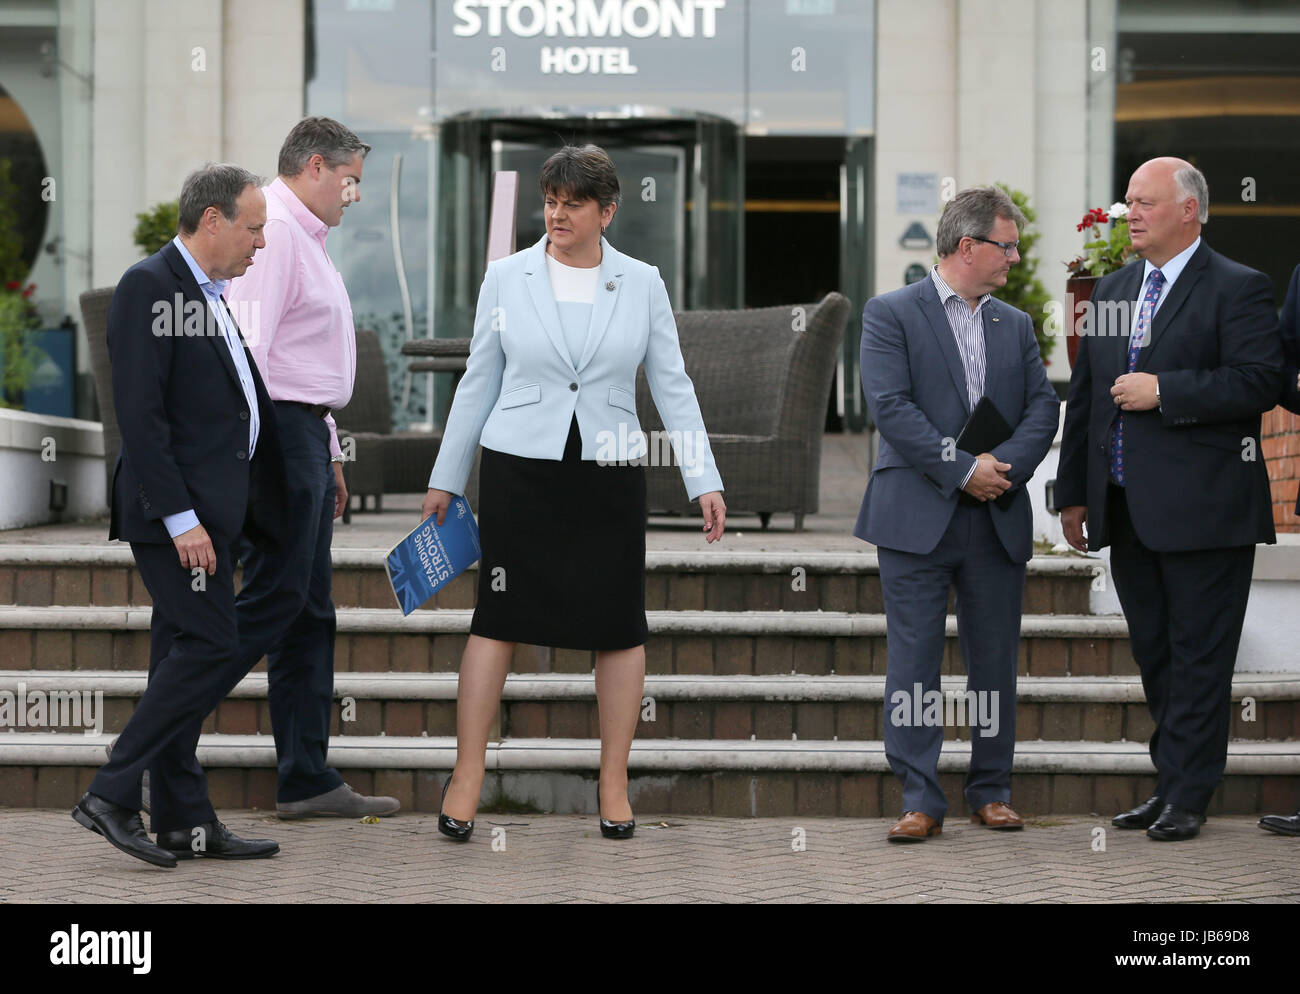 DUP leader Arlene Foster (centre) with MP's at the Stormont Hotel in Belfast after Prime Minister Theresa May has announced that she will work with friends and allies in the DUP to enable her to lead a government. Stock Photo